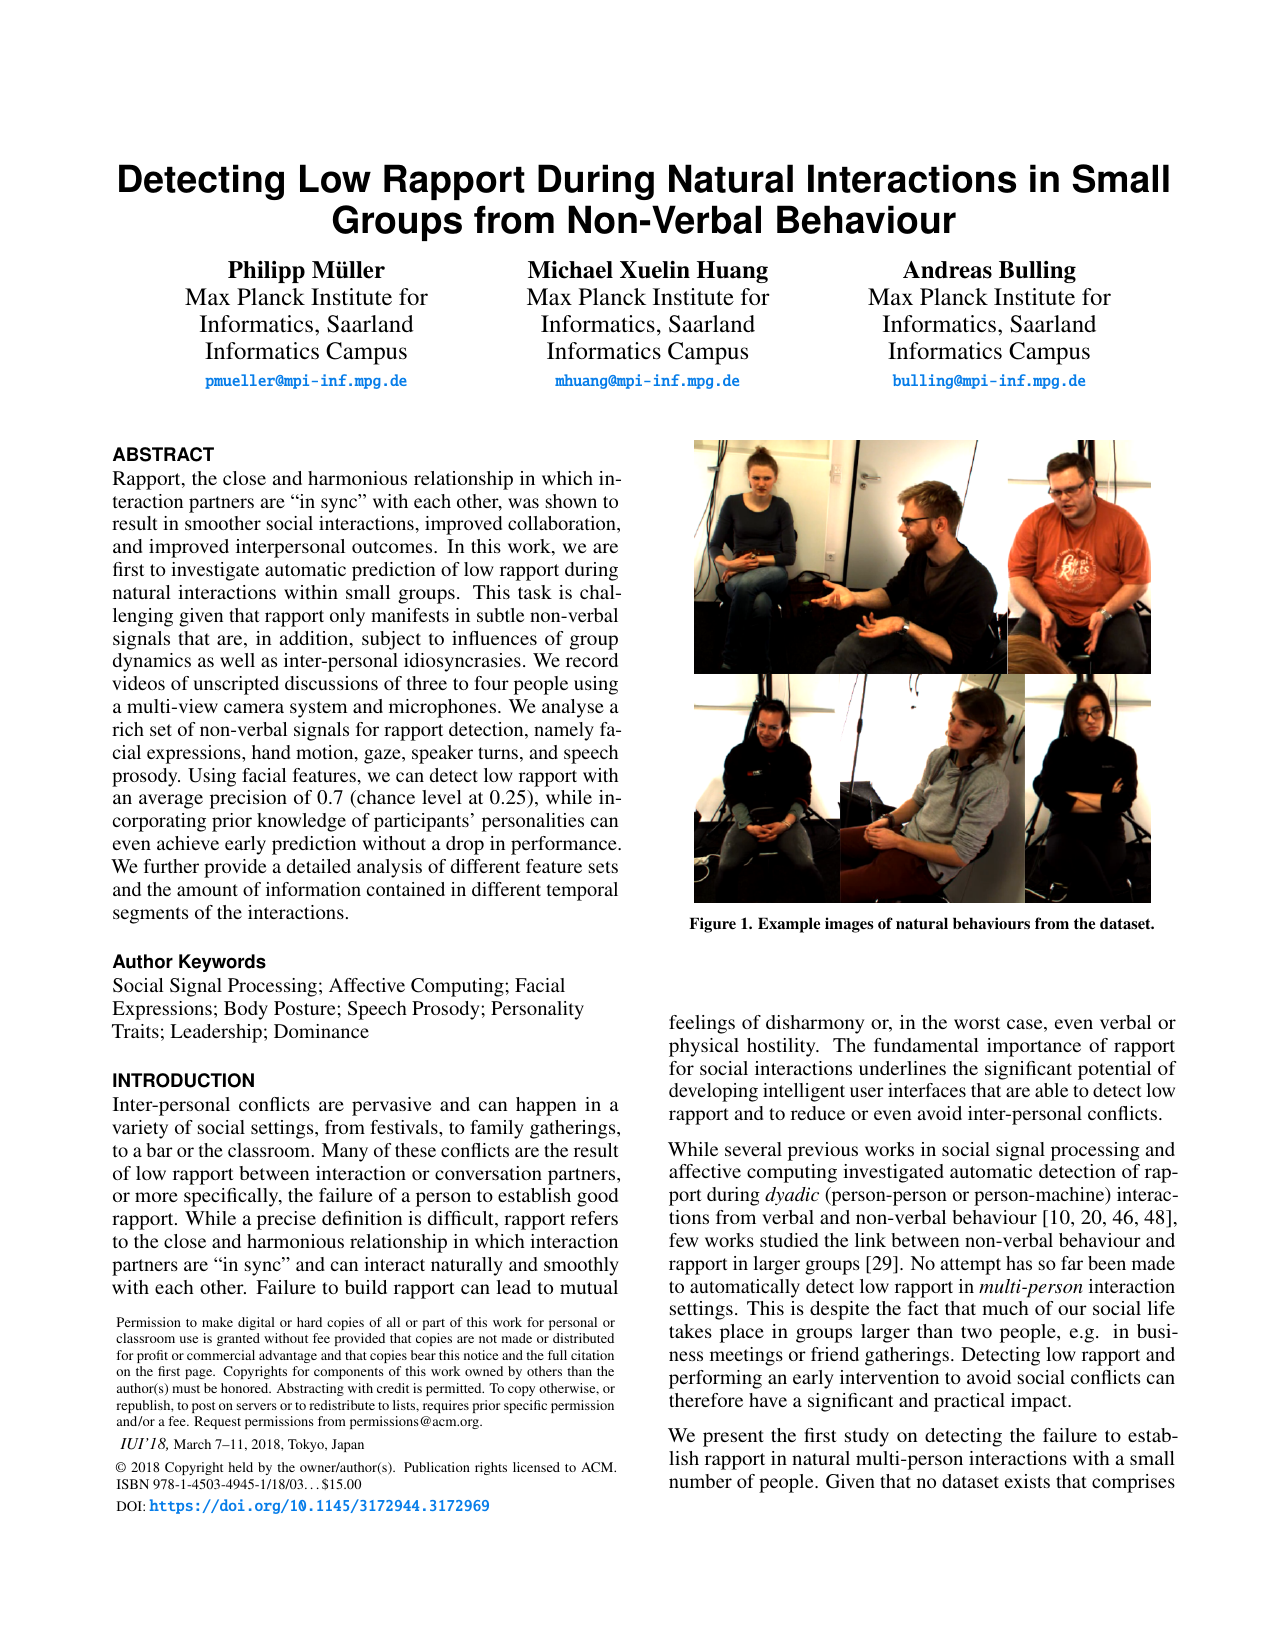 Detecting Low Rapport During Natural Interactions in Small Groups from Non-Verbal Behavior